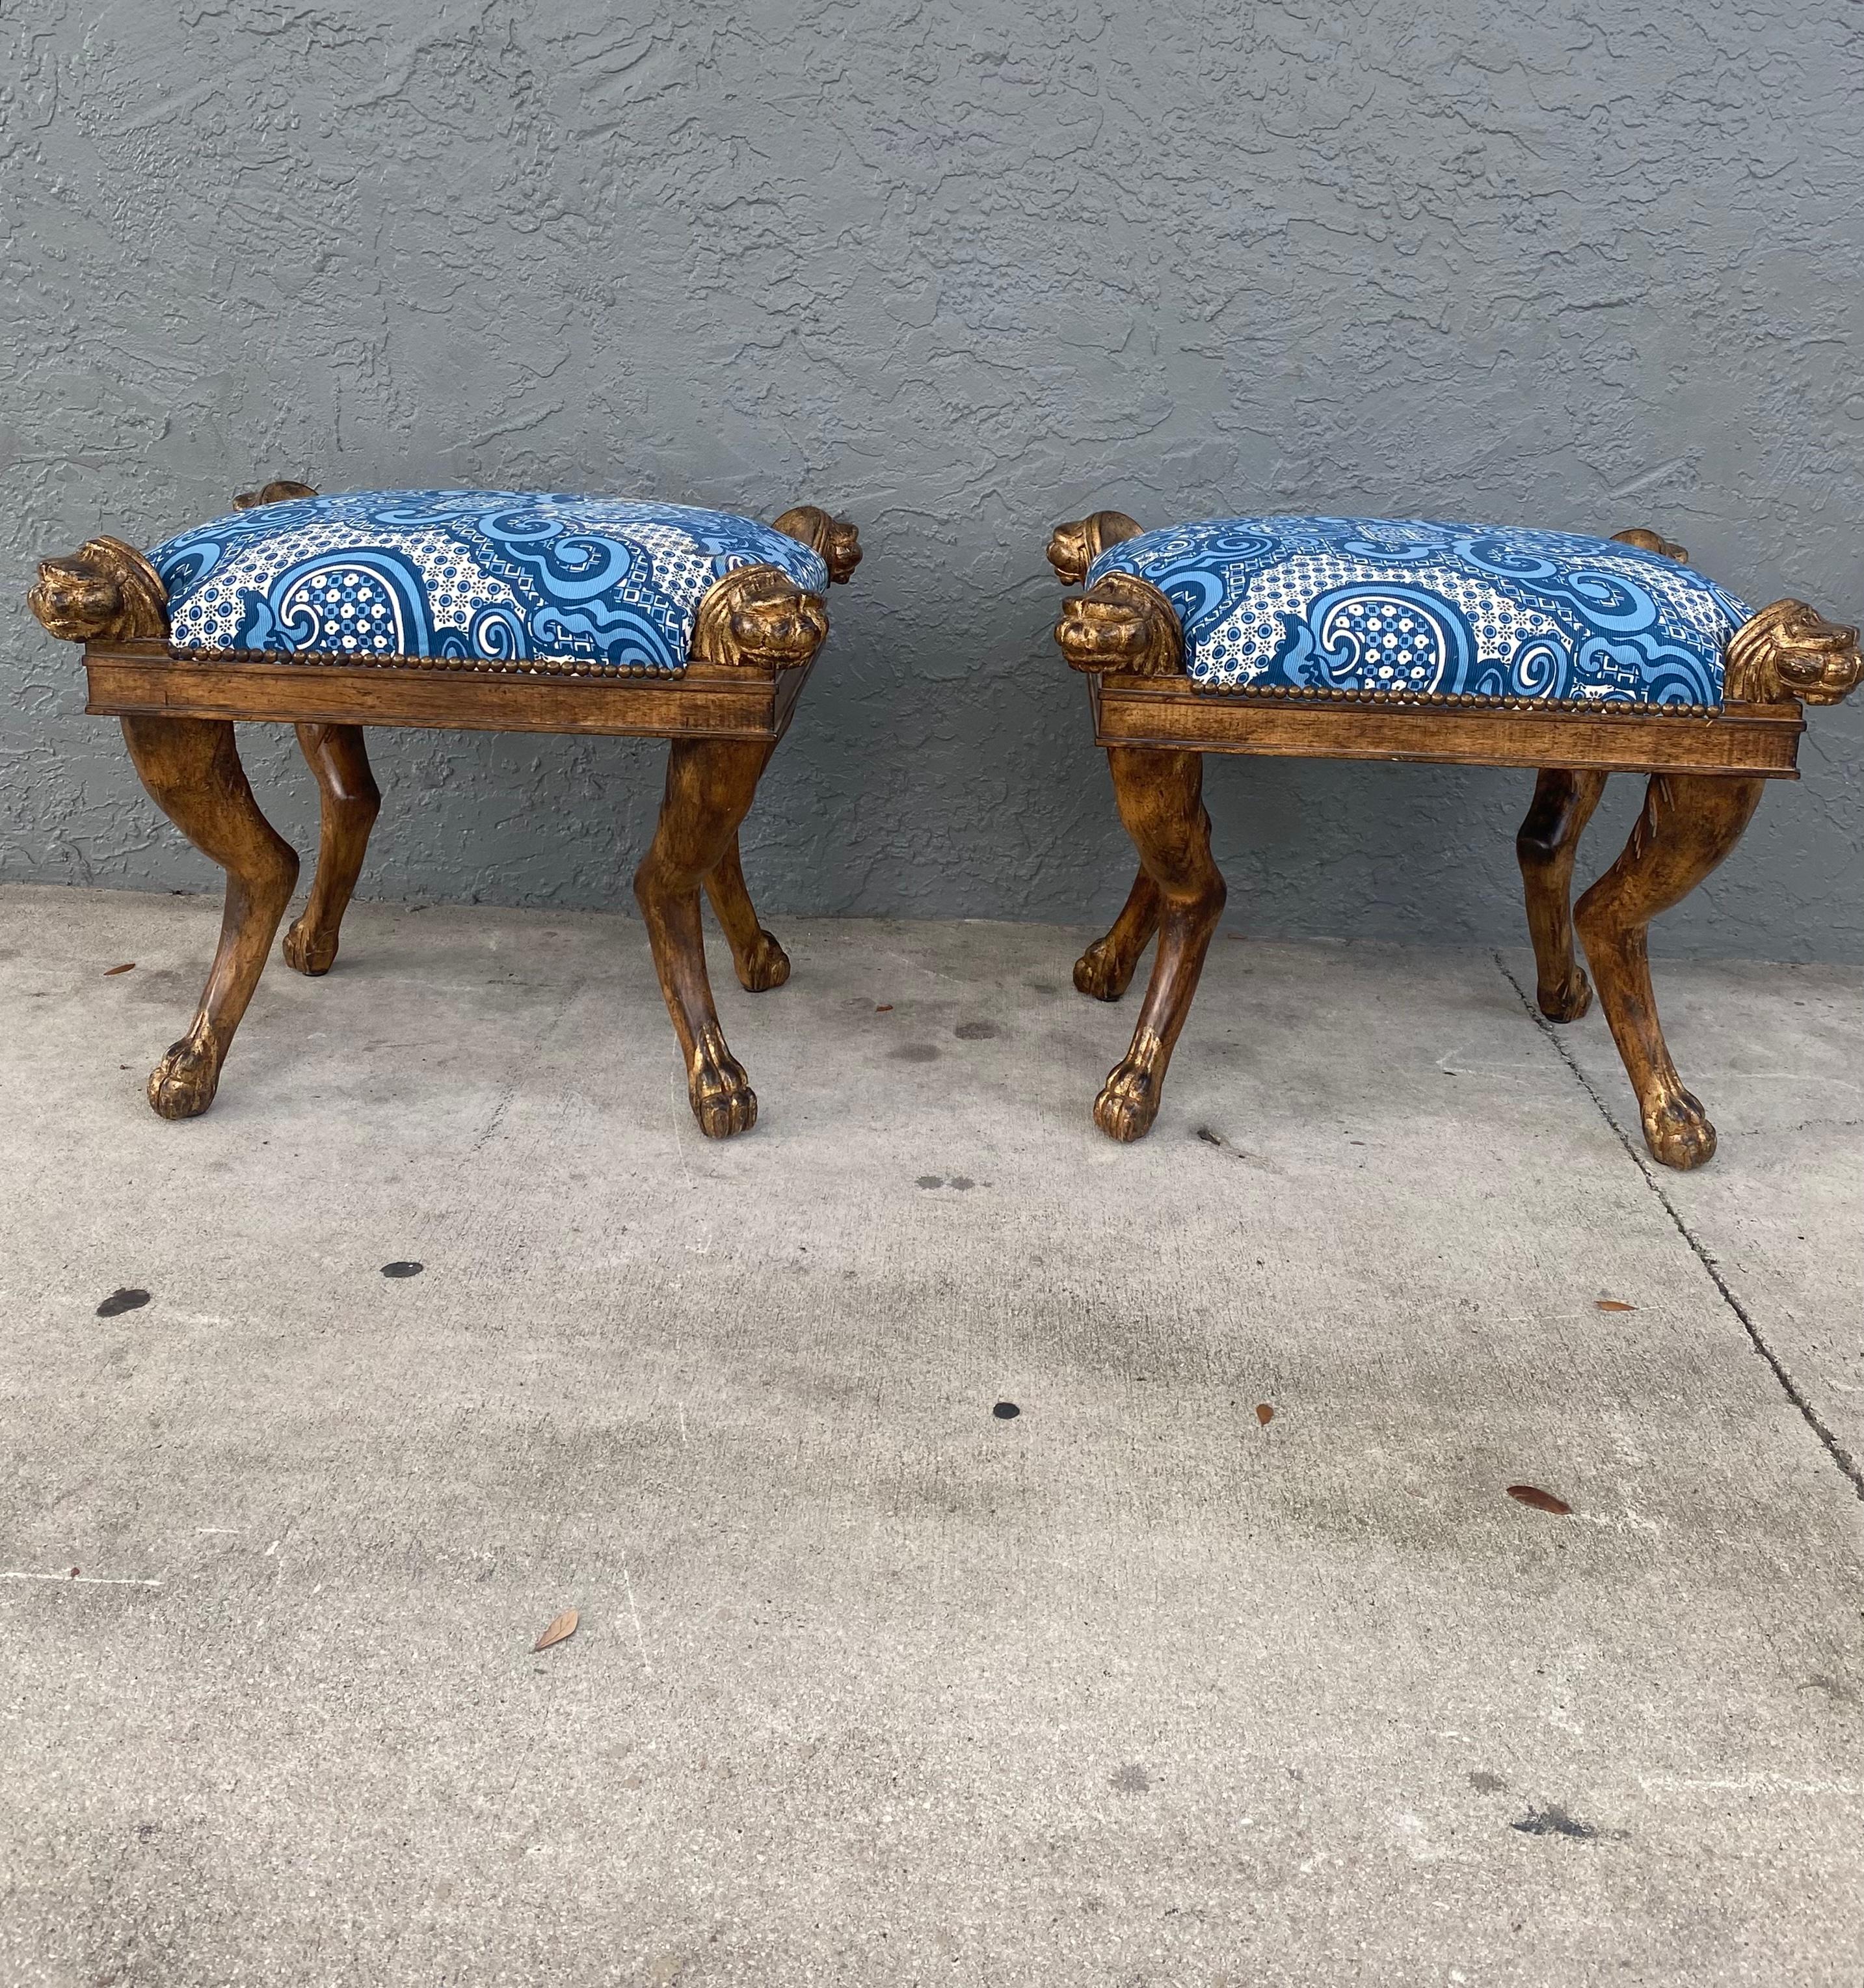 1960s Sculptural Carved Wood Lion Blue and White Bench Ottoman Stool For Sale 1